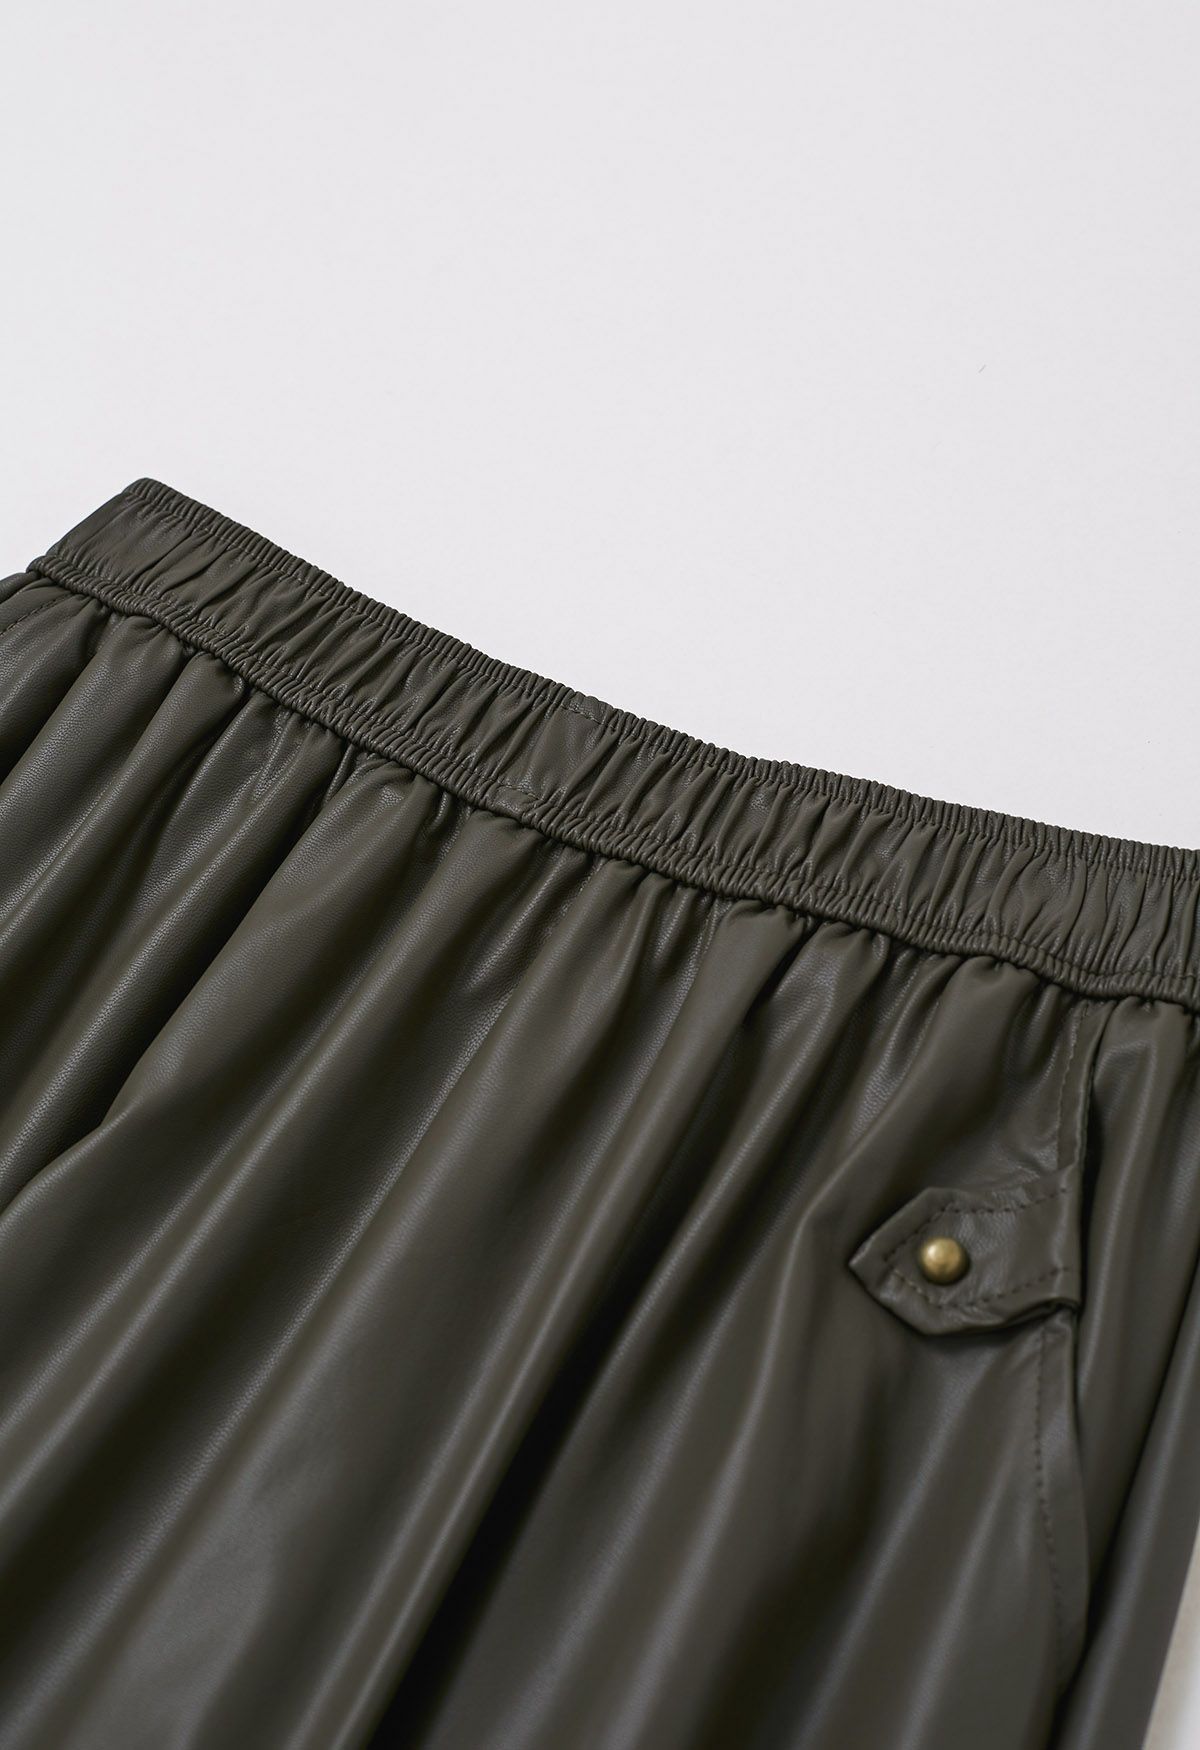 Basic Soft Faux Leather A-Line Skirt in Olive